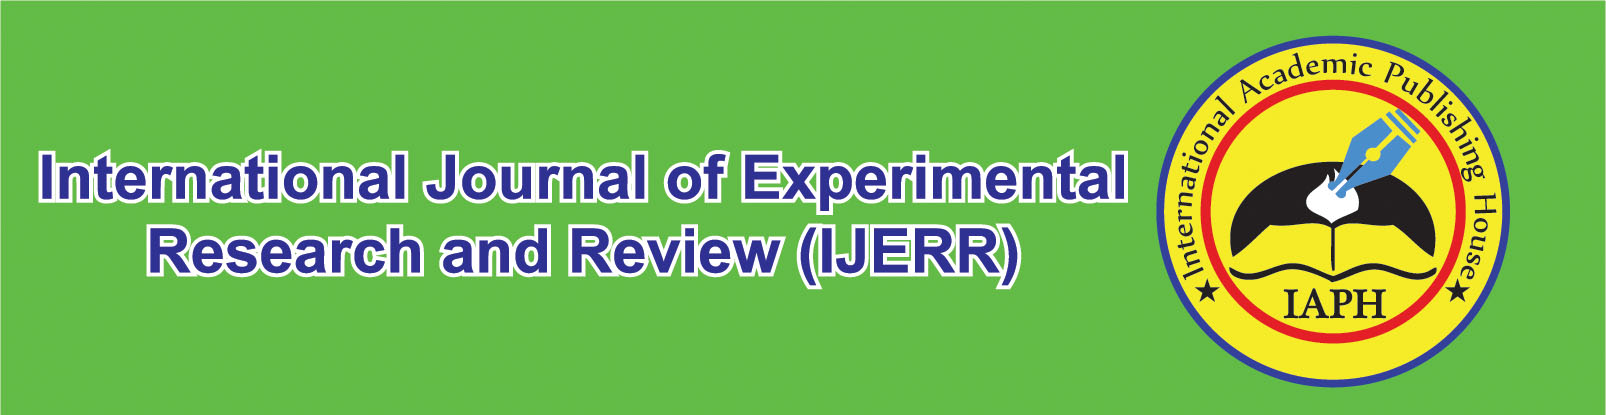 International Journal of Experimental Research and Review